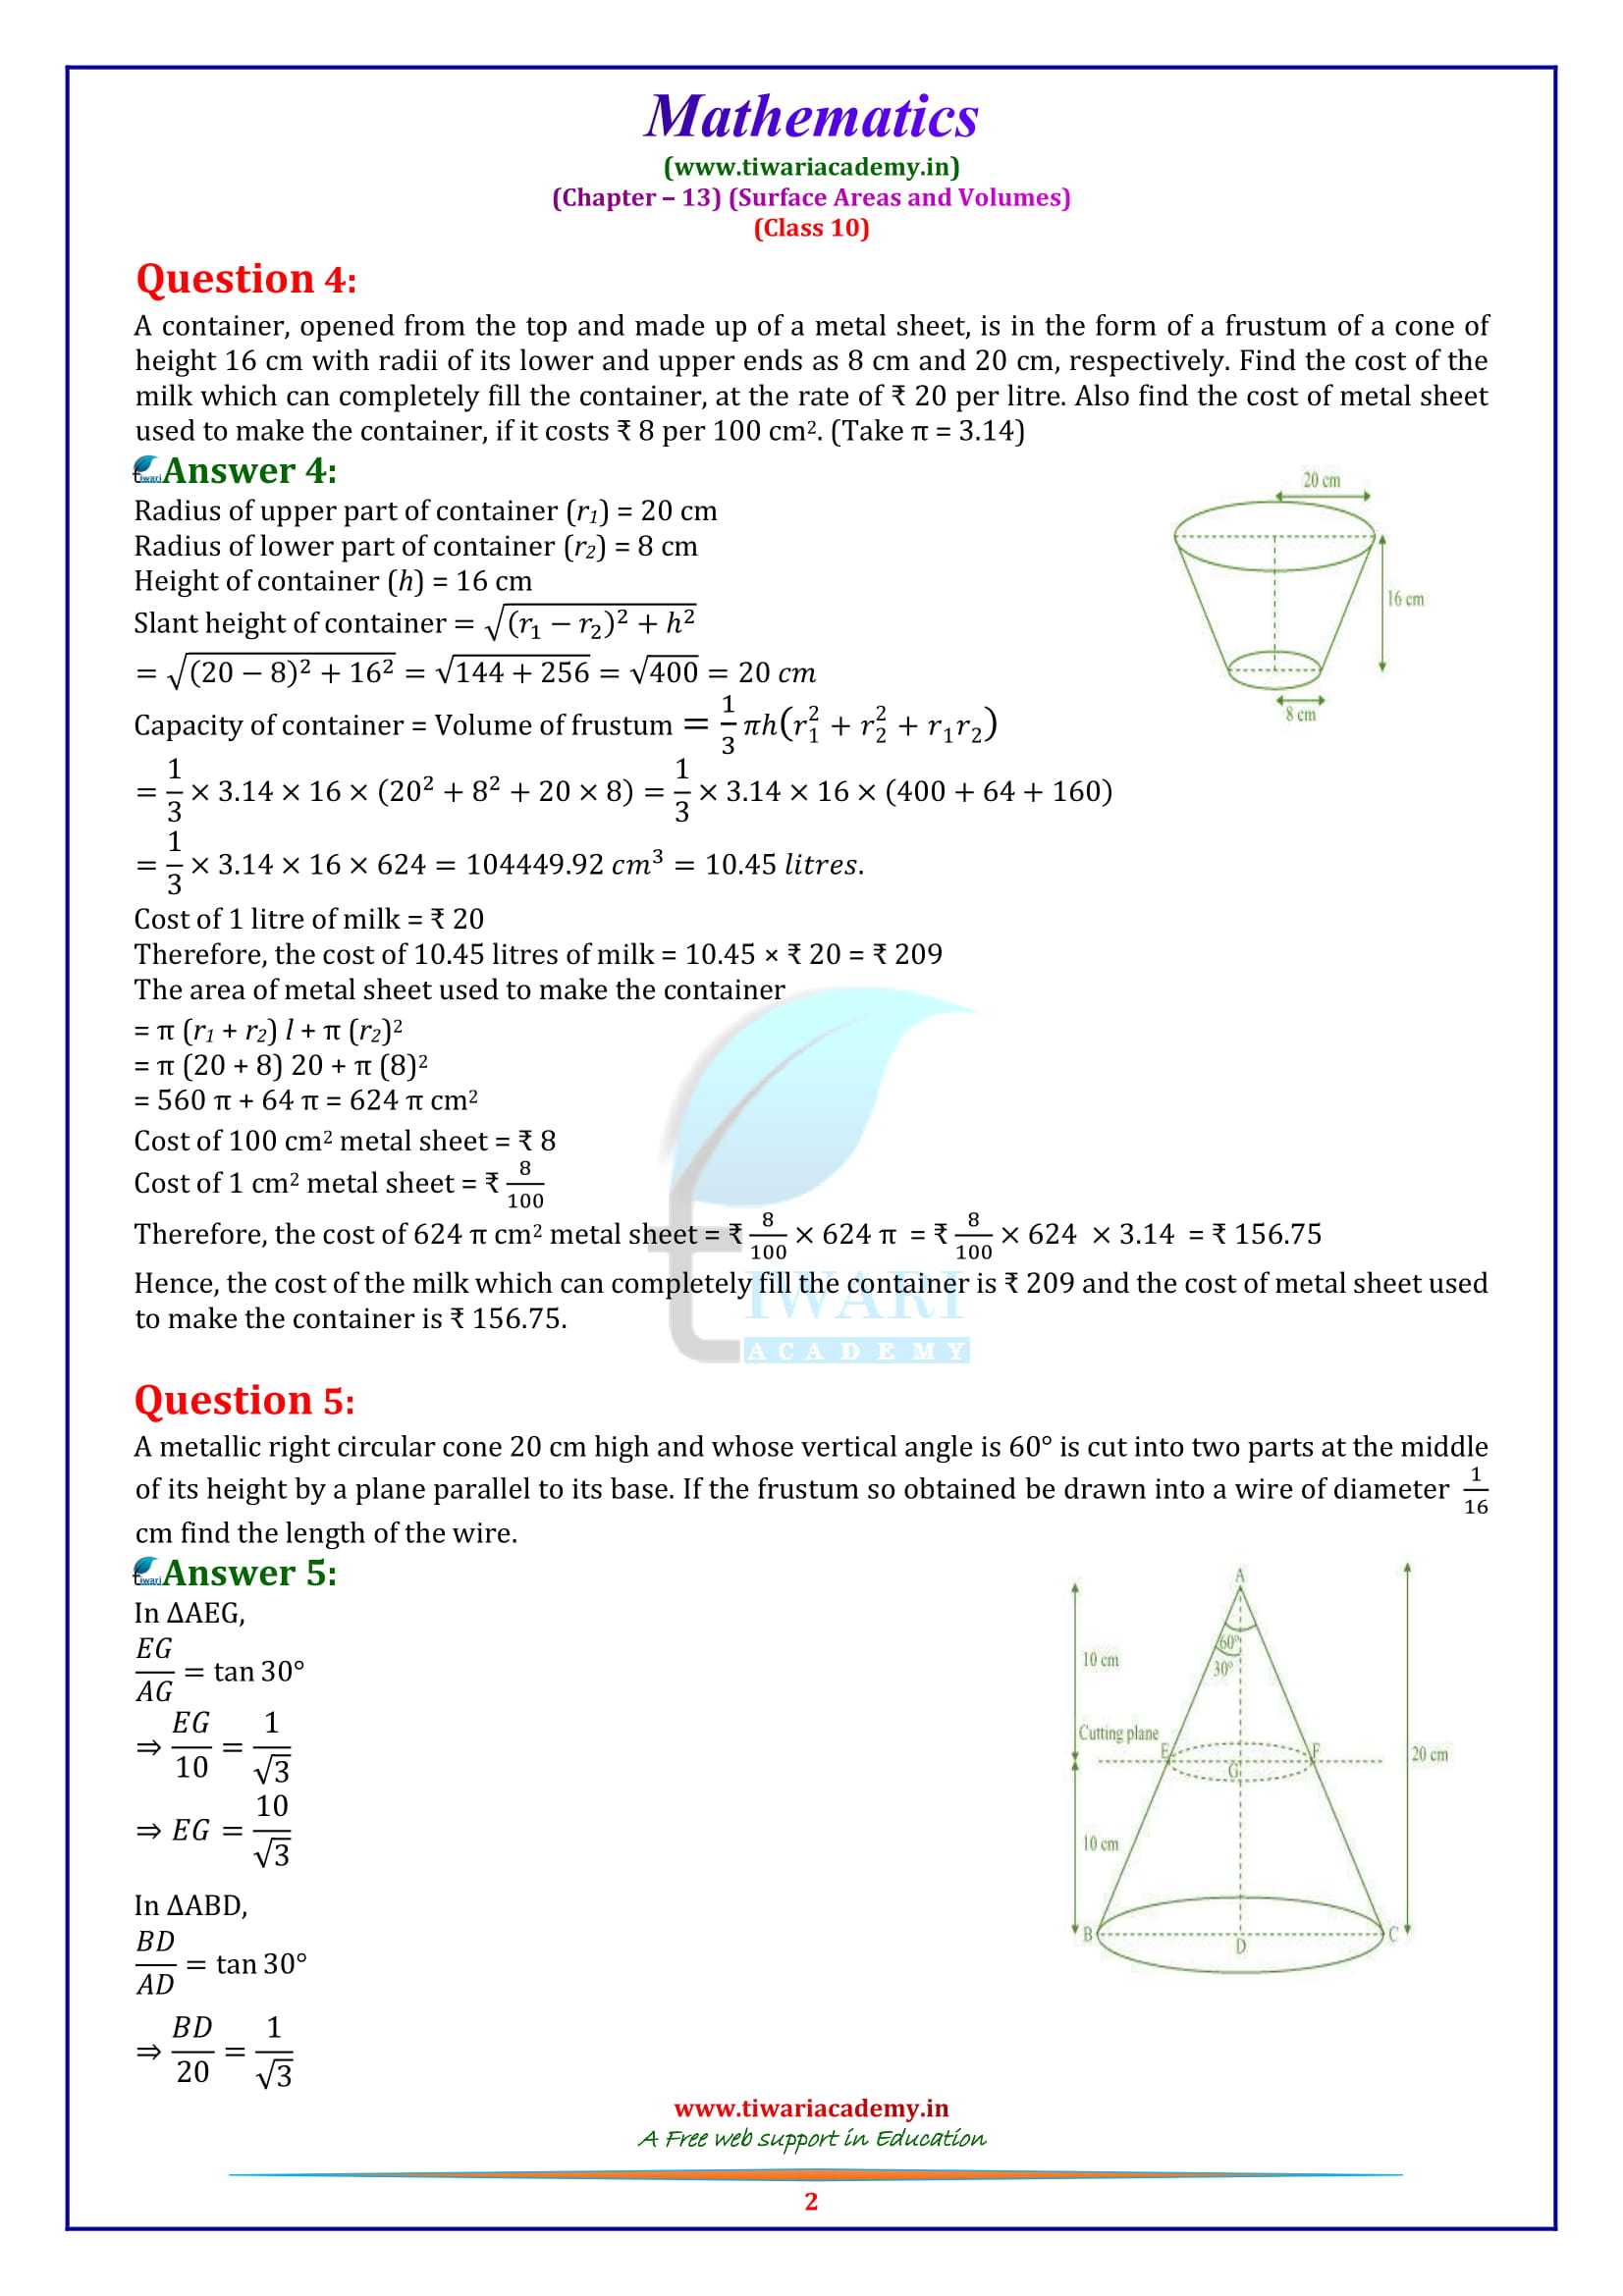 NCERT Solutions for class 10 Maths Exercise 13.4 in updated form for 2020 – 2021